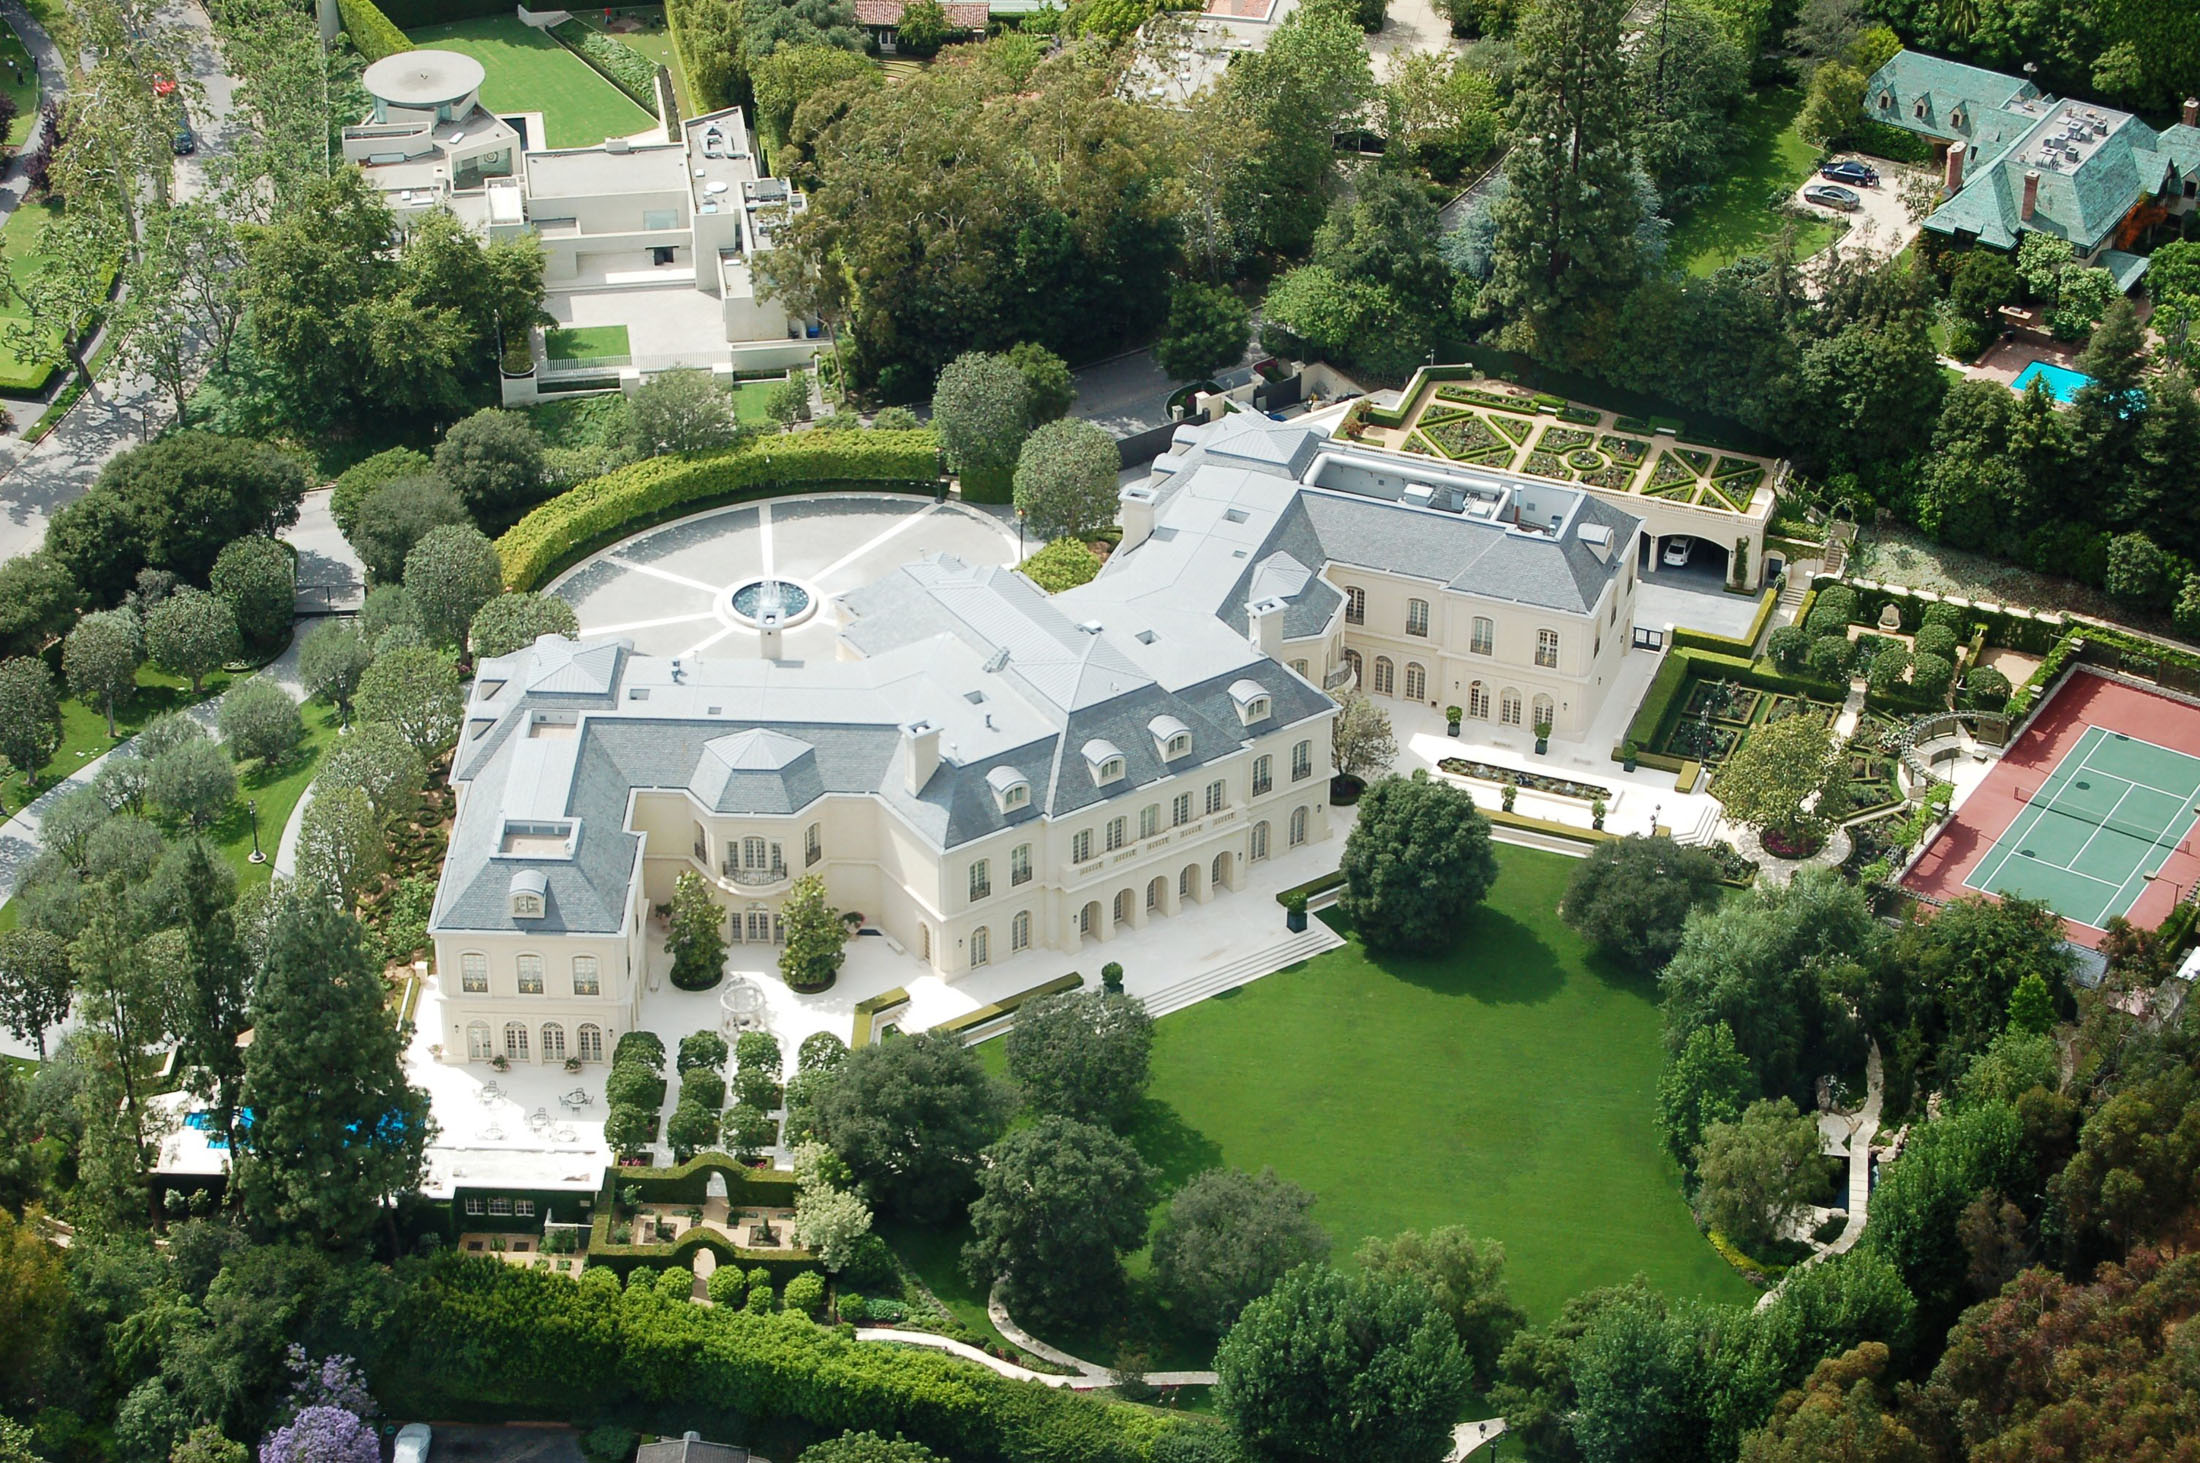 http://www.idesignarch.com/wp-content/uploads/French-Chateau-Style-Mansion_1.jpg